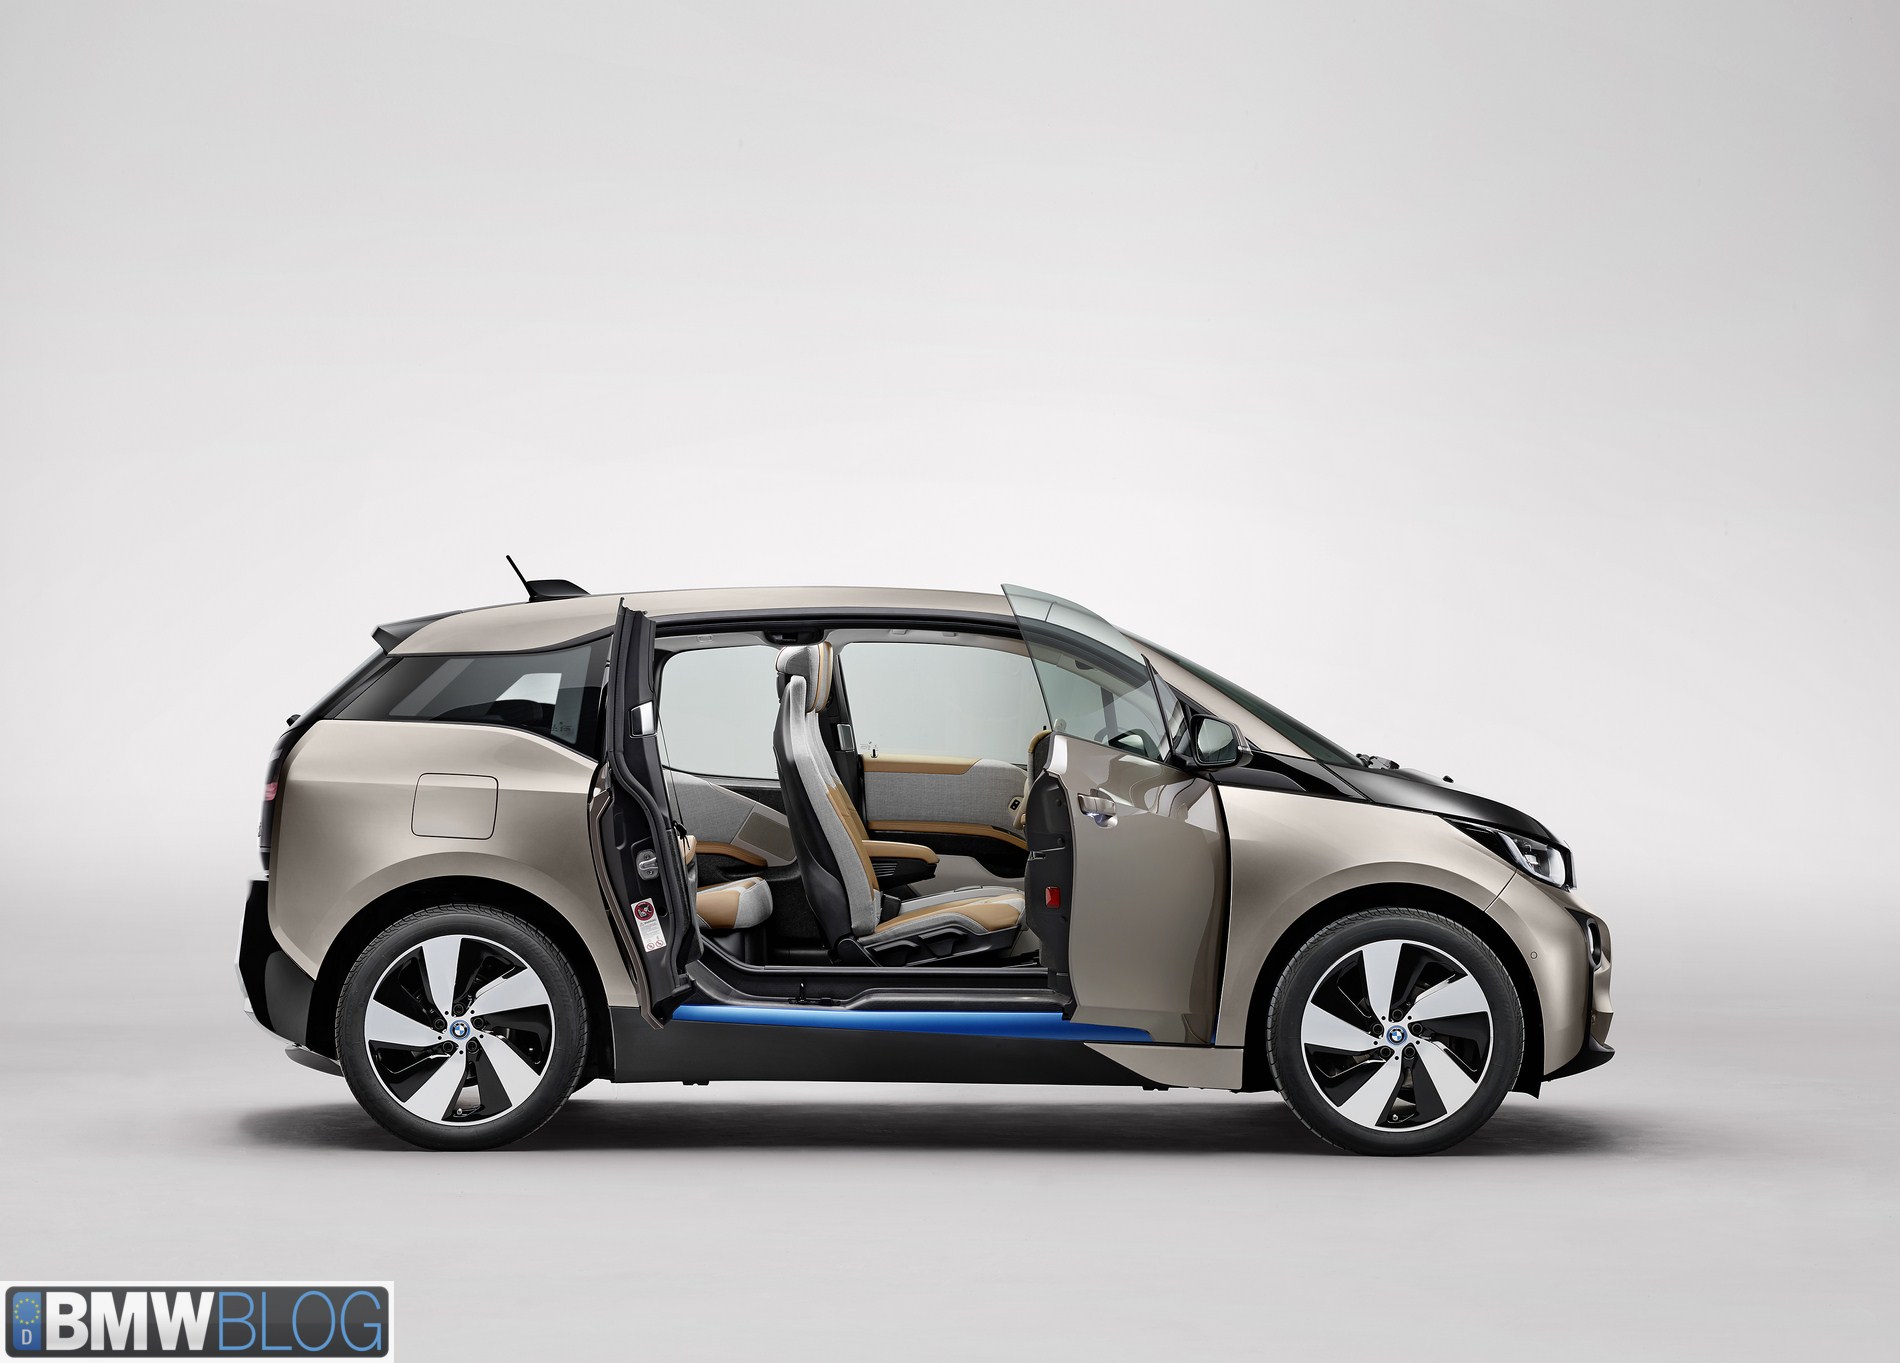 Report: BMW i3 nameplate could be used on upcoming 3 Series EV